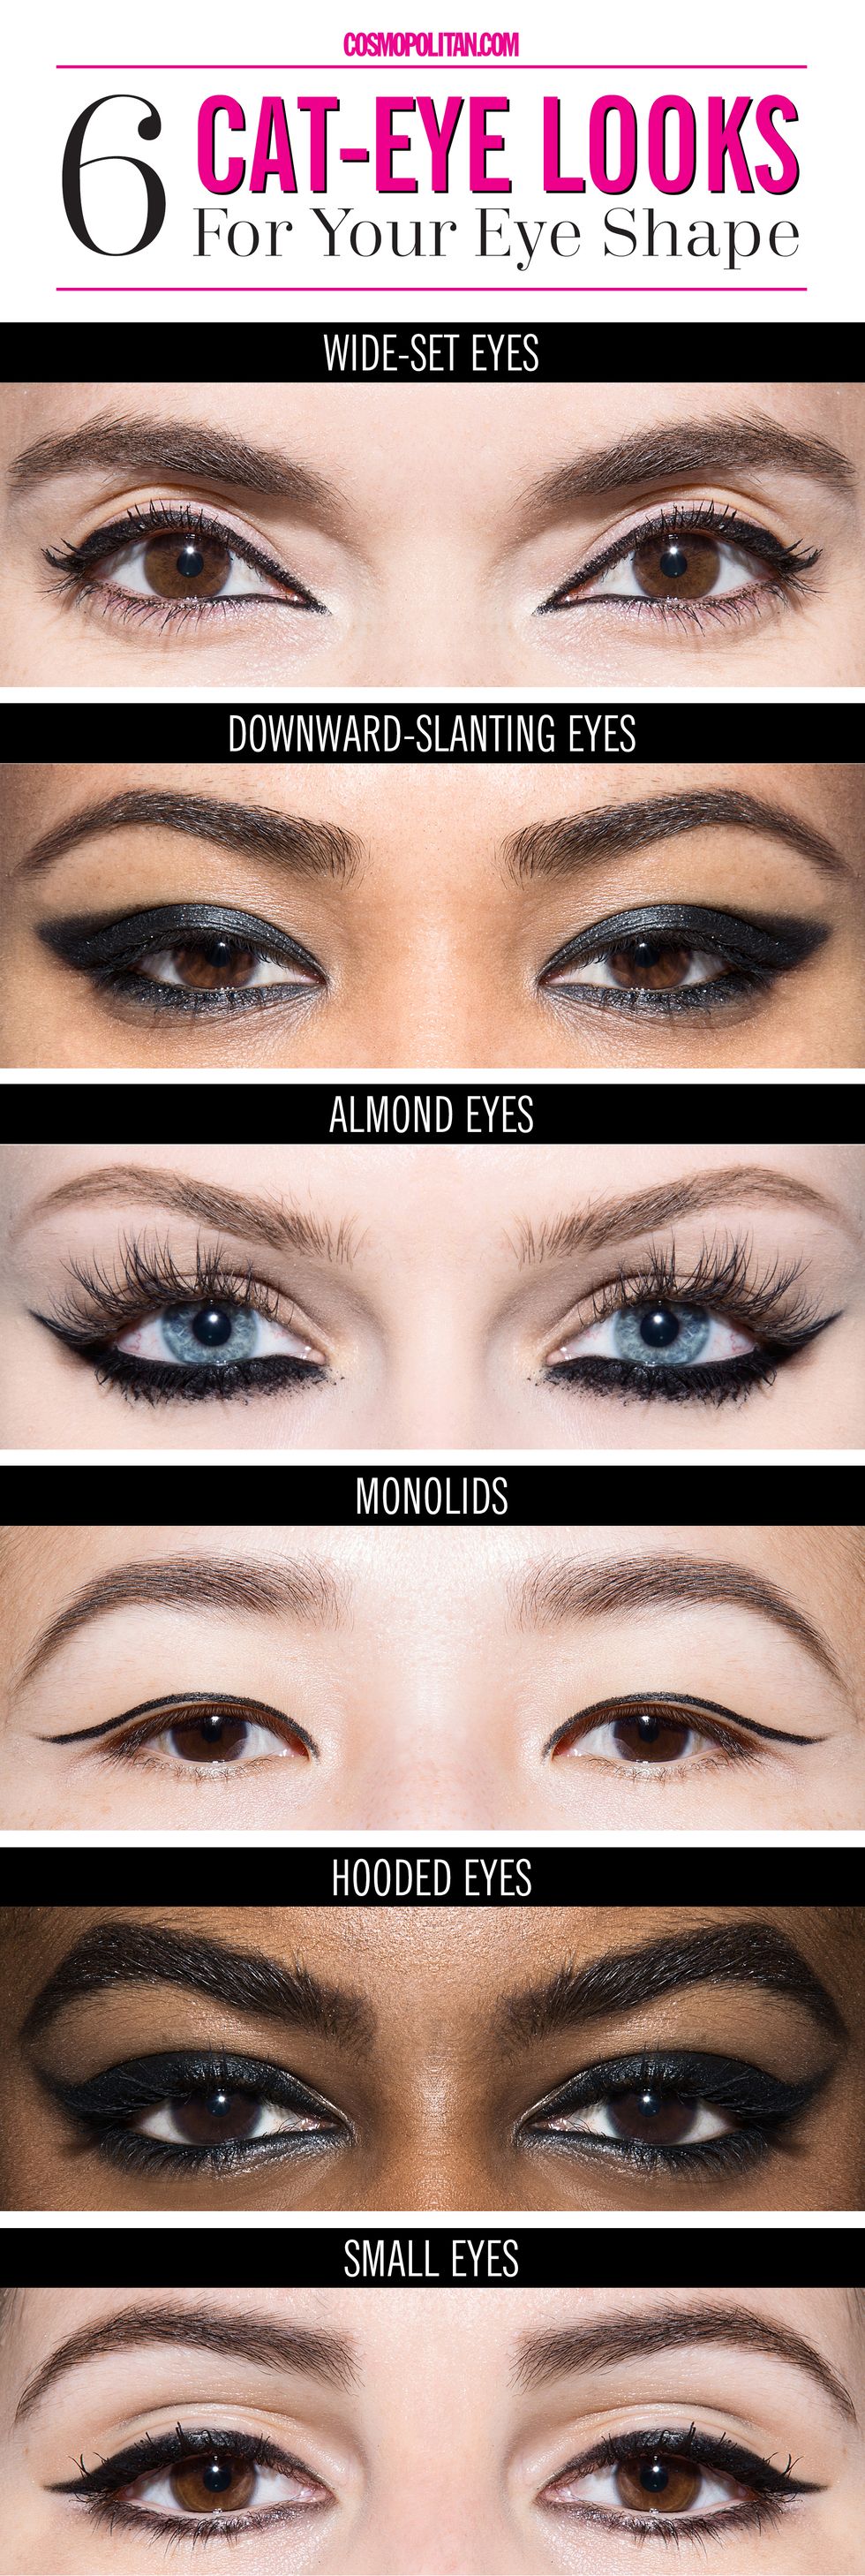 How To Get The Perfect Cat-Eye For Every Eye Shape